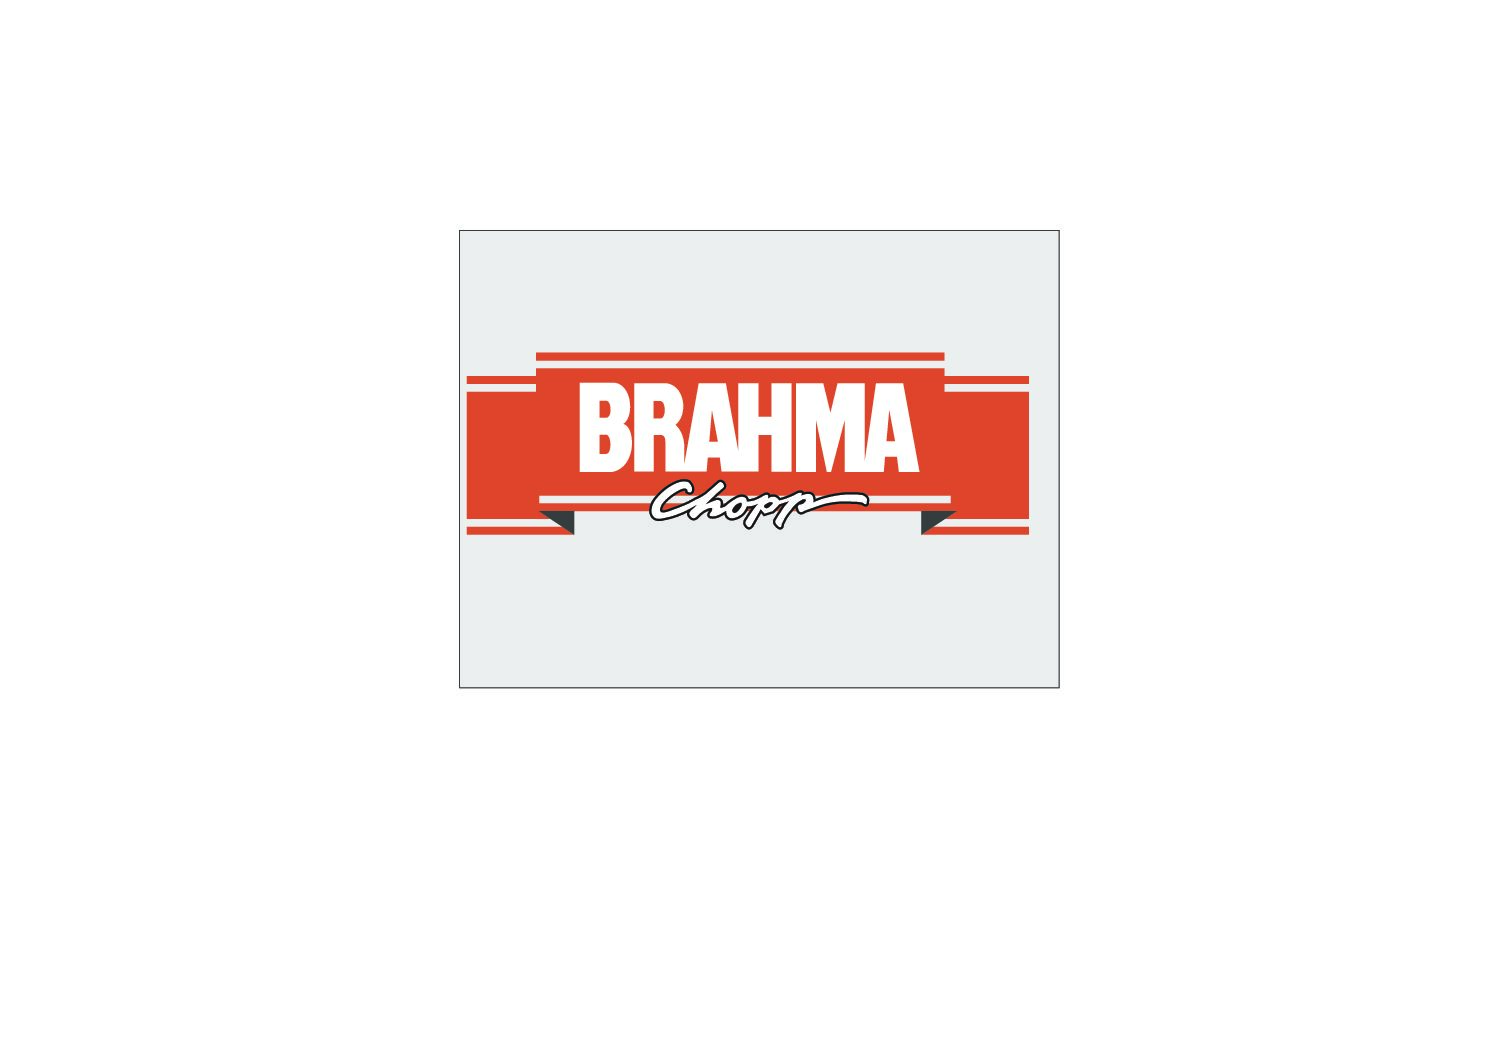 Taboka Visuals | Graphic Design | Website Design | Logo Design for Tiro  Brahman, a South African producer of Brahman Cattle. Brahman is one of the  most popular breeds of cattle intended fo... | Instagram